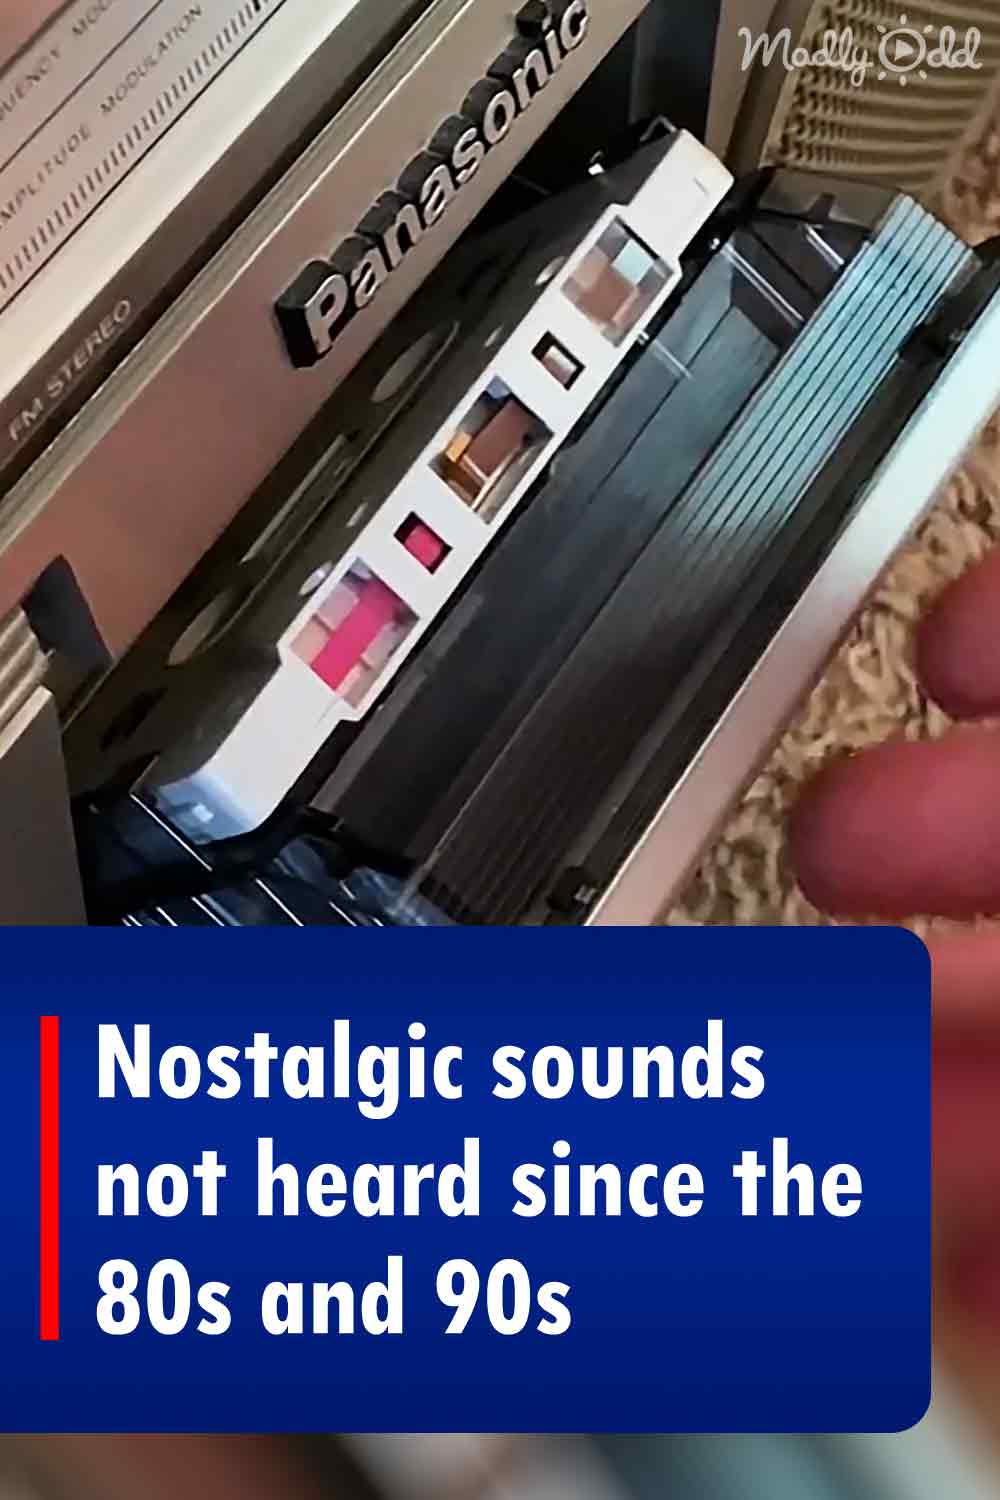 Nostalgic sounds not heard since the 80s and 90s